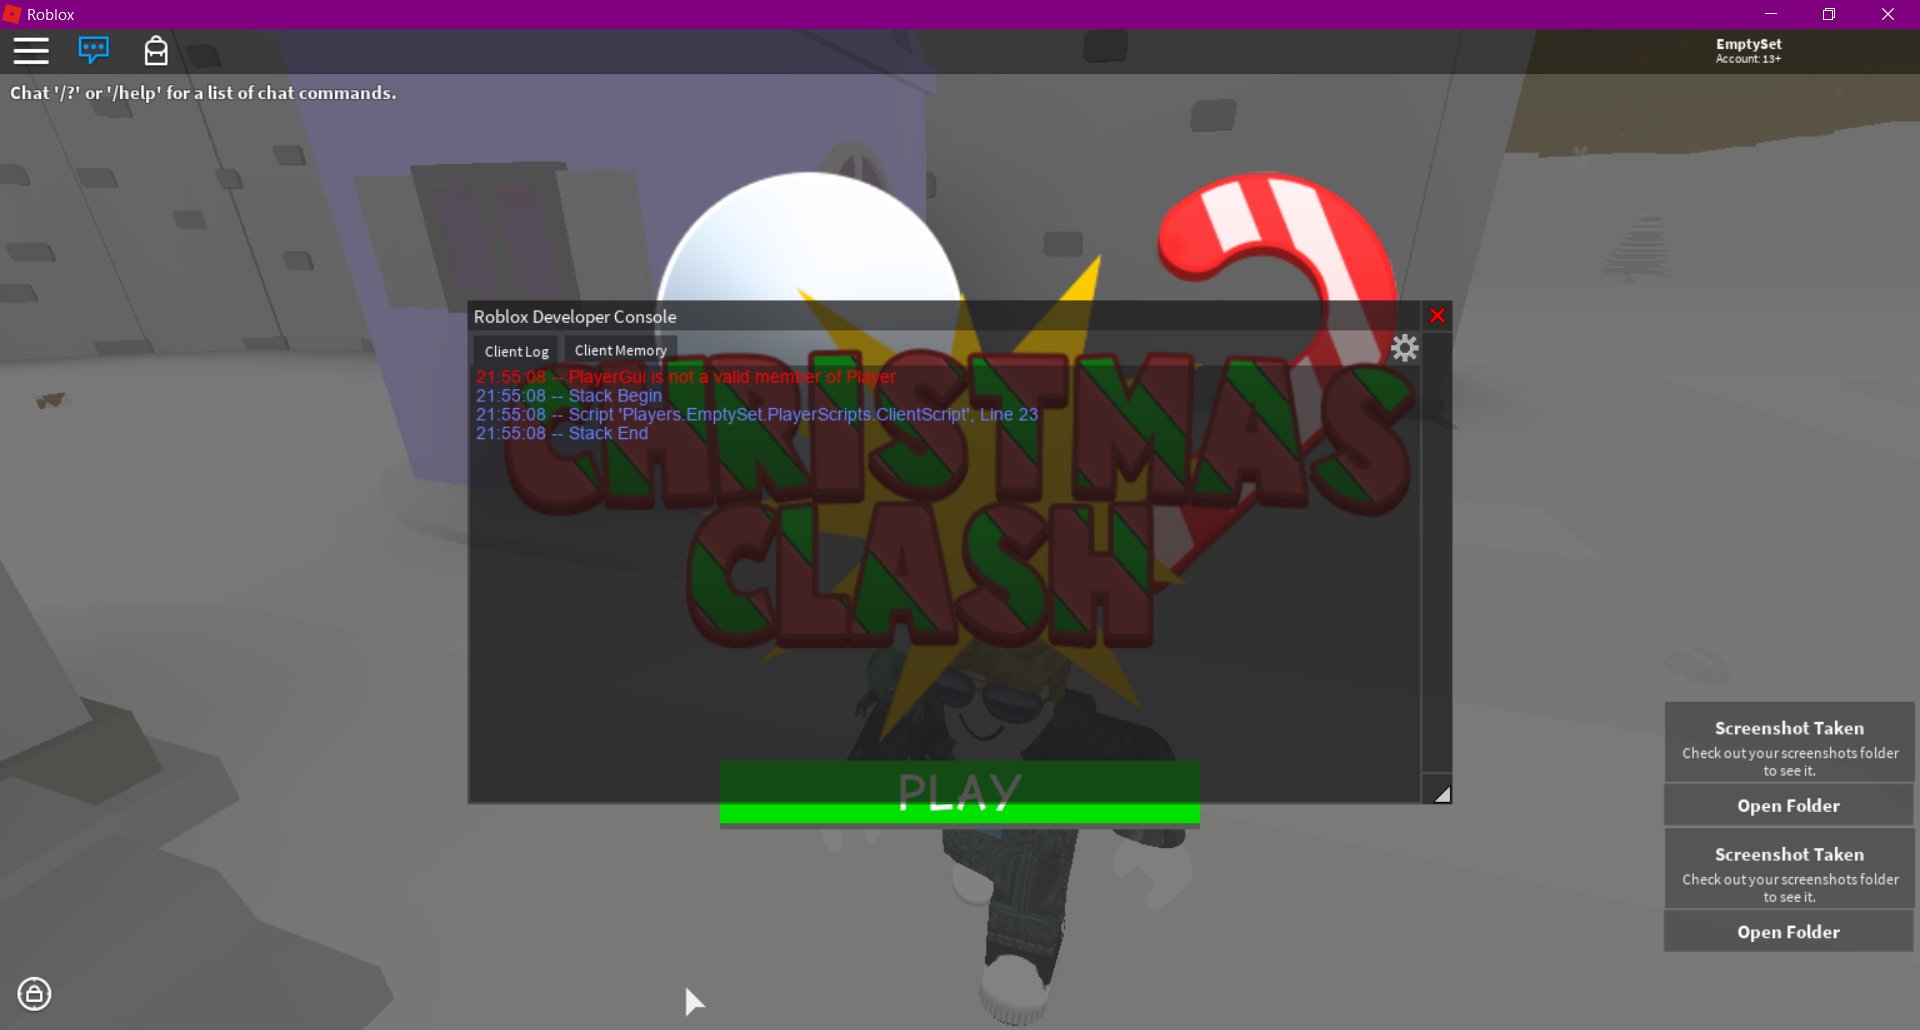 Empty Set On Twitter Play Button Don T Work - how to open developer console in roblox